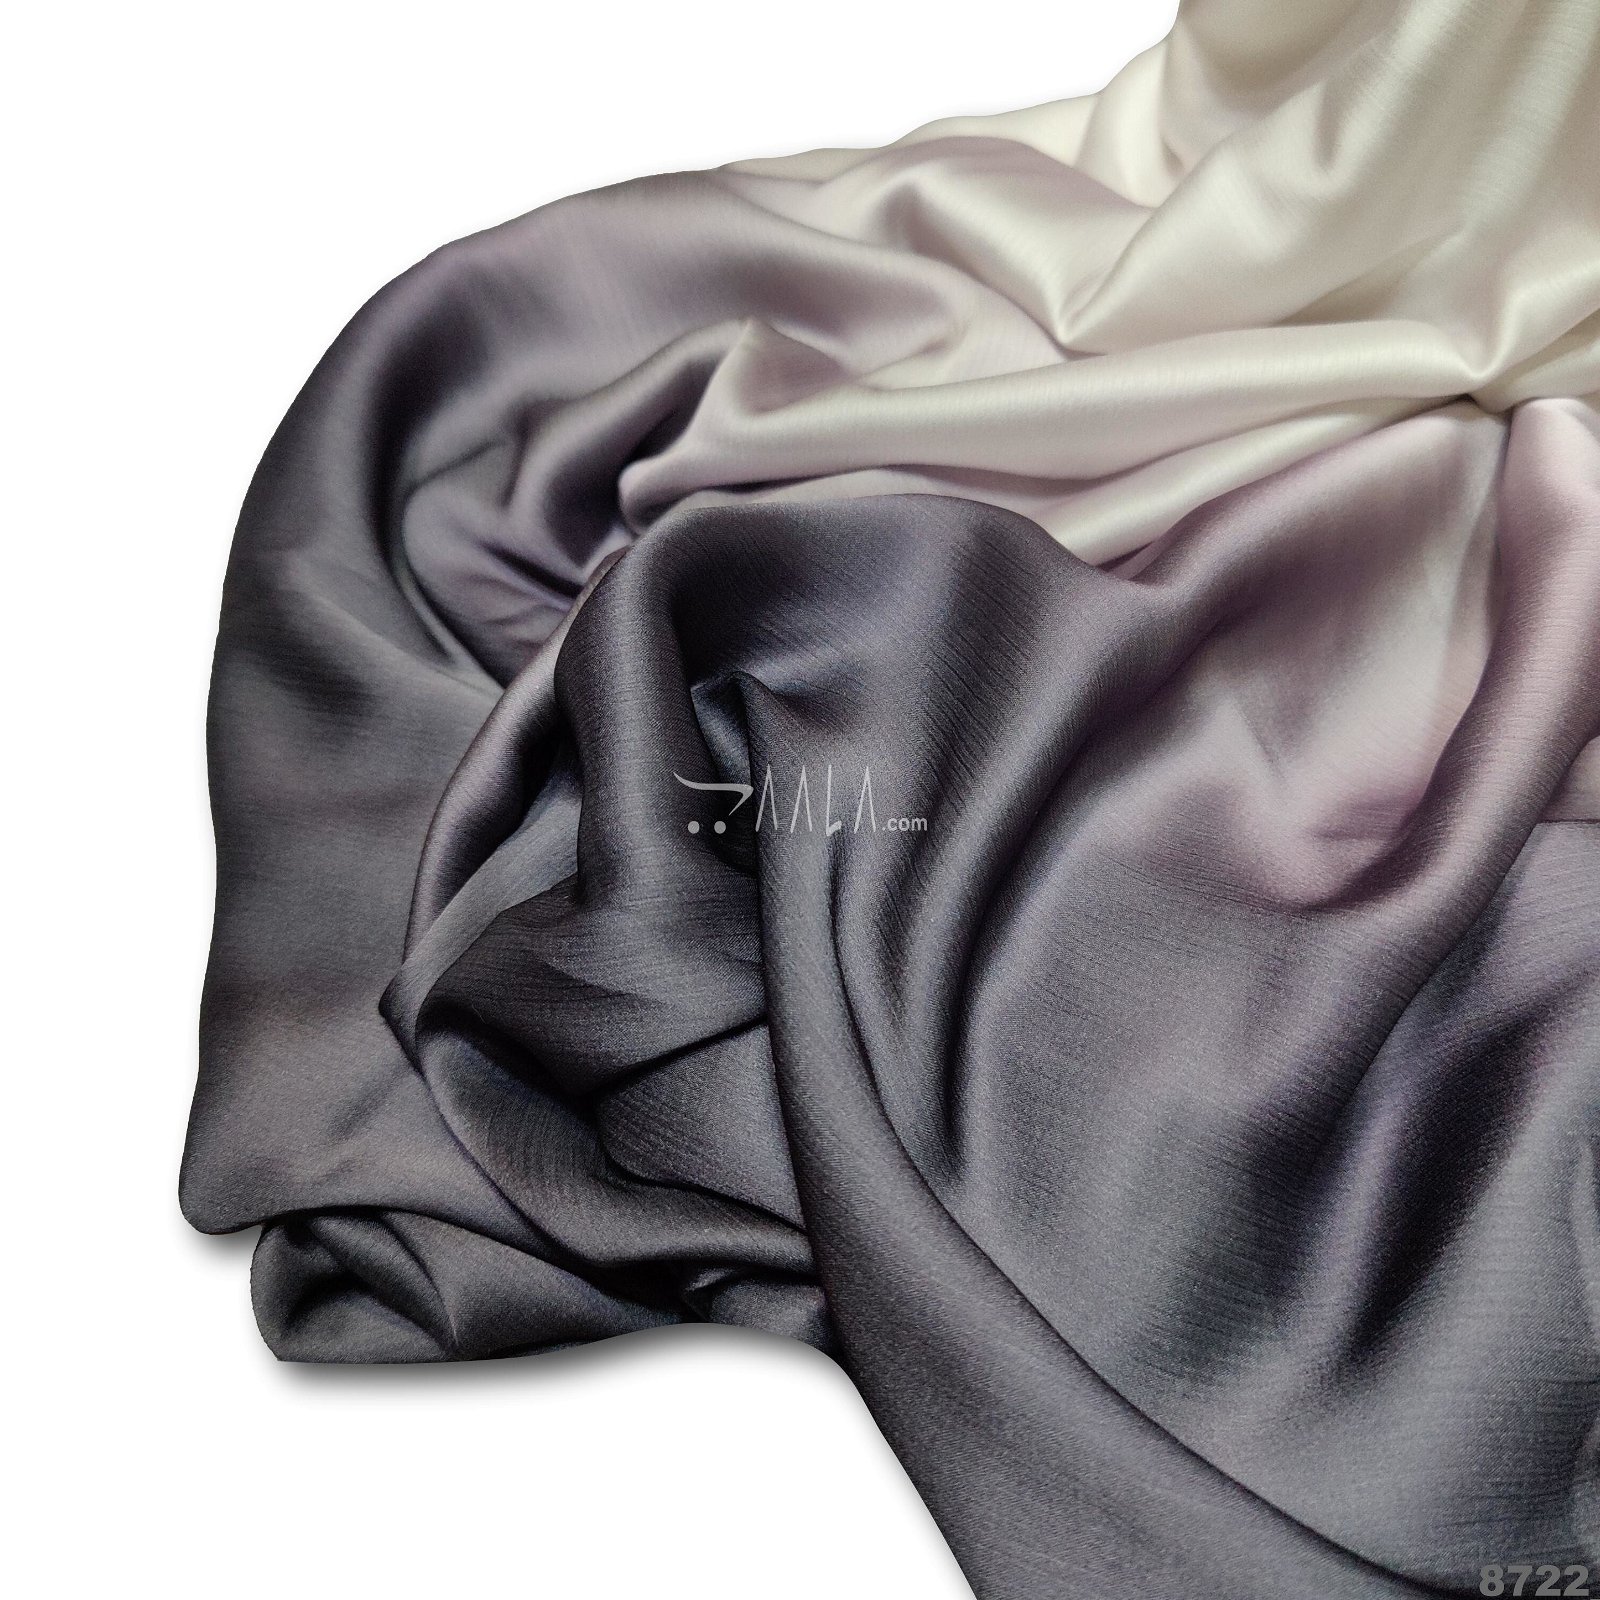 Shaded Satin-Chiffon Poly-ester 44-Inches ASSORTED Per-Metre #8722